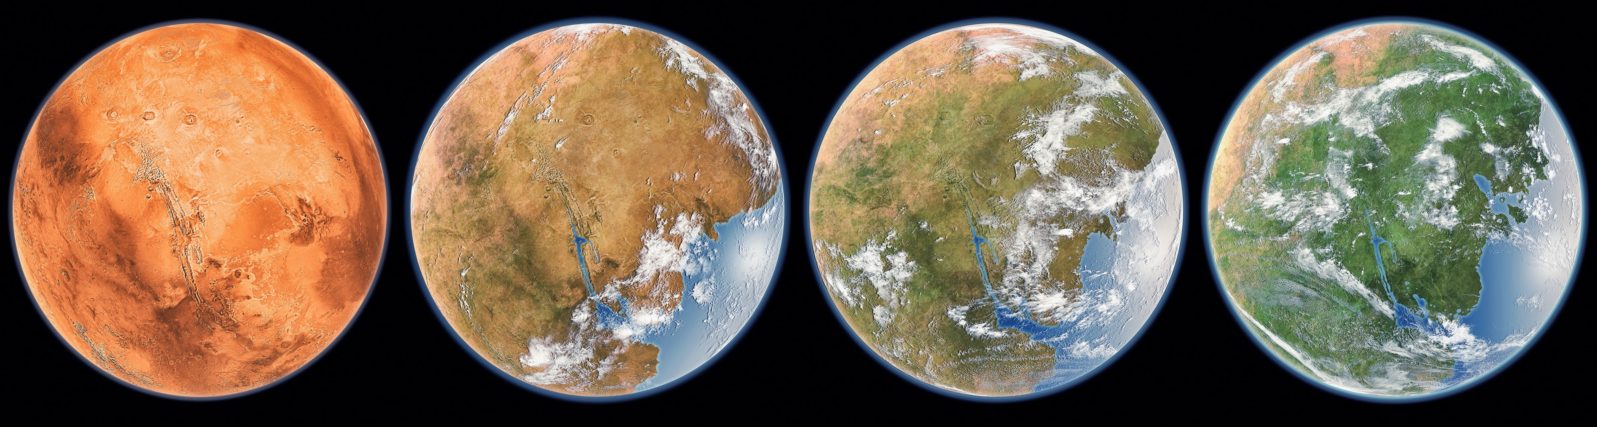 Mars terraforming step (Elements of this image furnished by NASA). 3D rendering